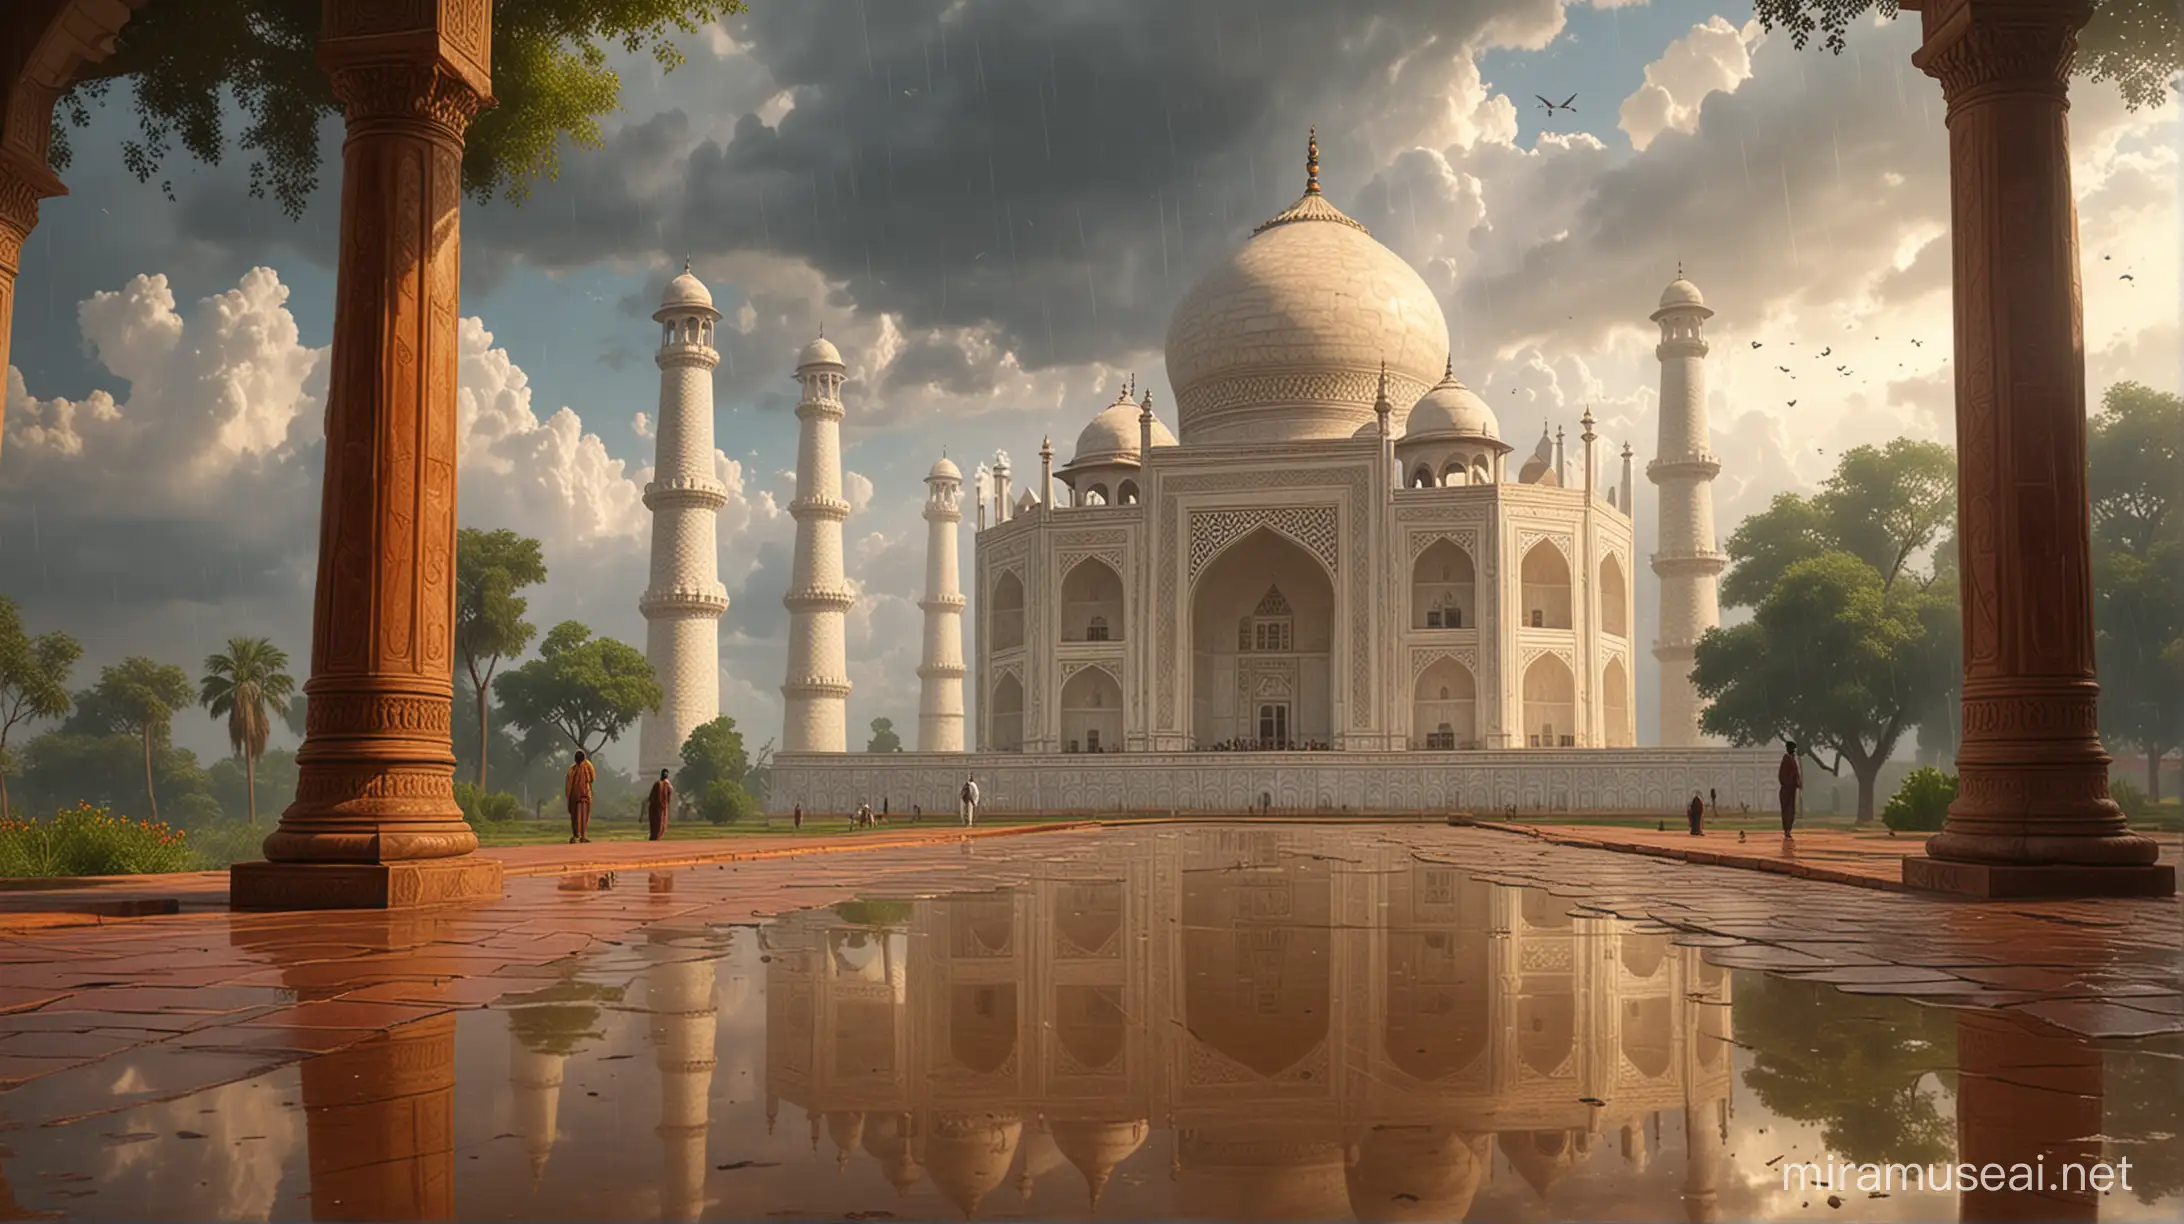 Taj Mahal under a lucid post-rainfall sky, sunlight bathing the scene, ethereal transparency, corner puddle reflecting monument and foliage, conveying tranquility, serenity of after-rain atmosphere, clear reflections, subtle light-dispersal, digital painting, golden ratio, vivid colors, highly detailed.